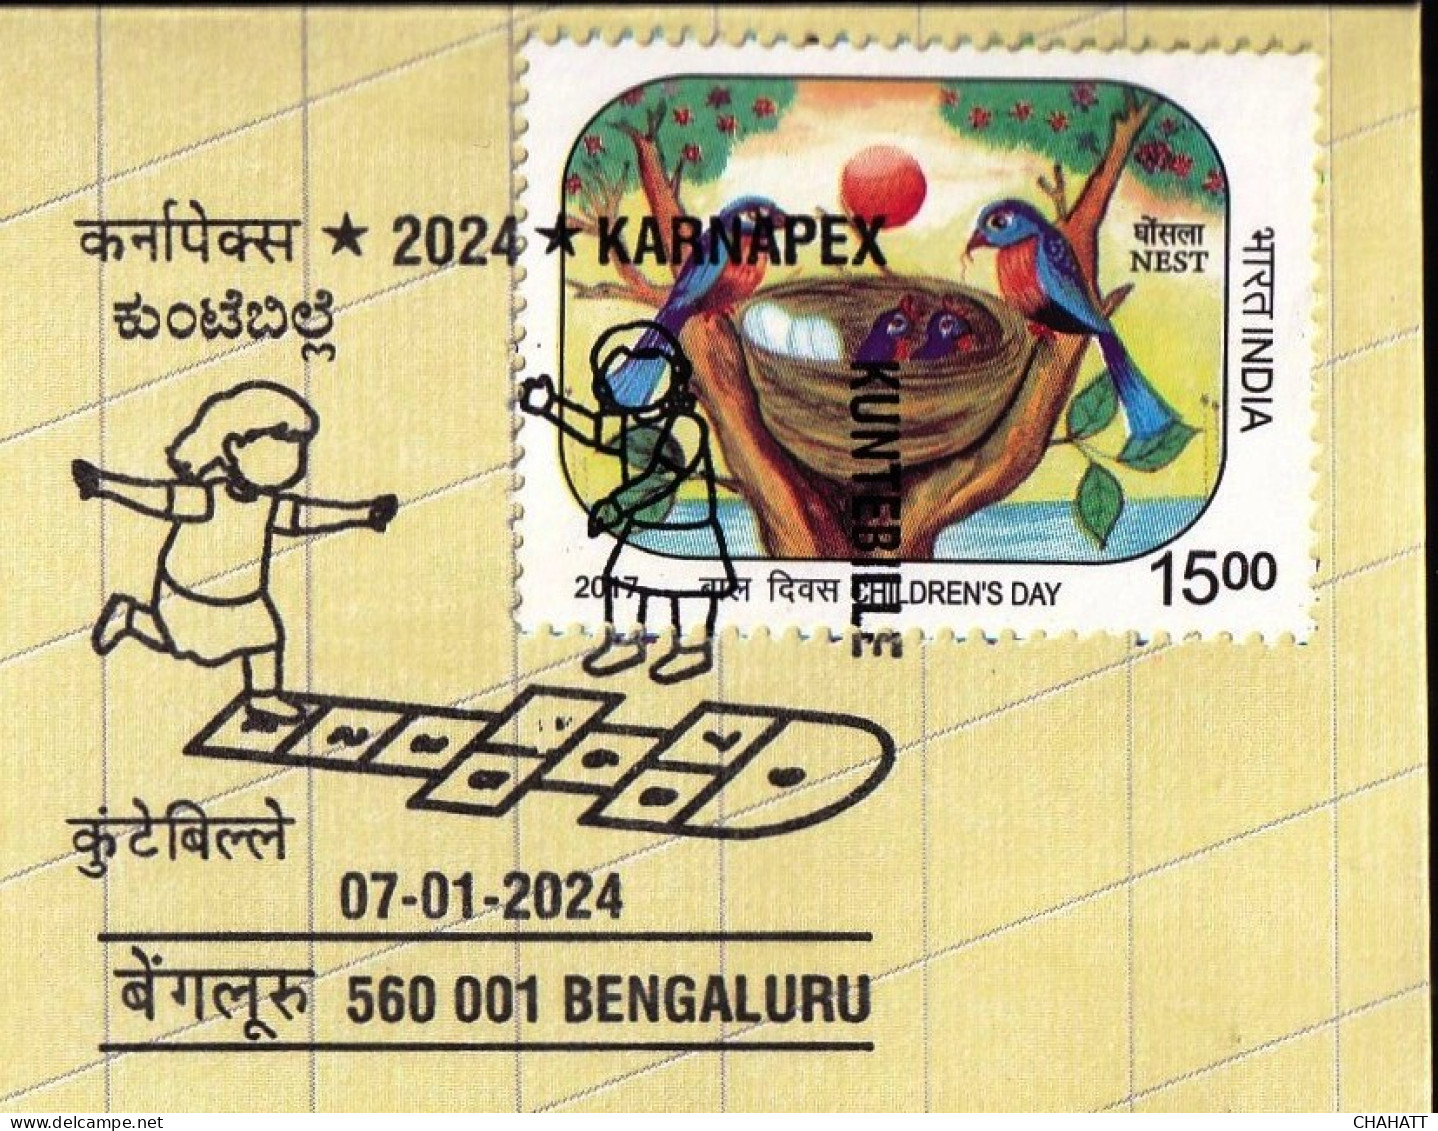 TRADITIONAL GAMES OF INDIA- HOPSCOTCH - KUNTEBILLE- PICTORIAL CANCEL-SPECIAL COVER-INDIA POST -BX4-30 - Sin Clasificación